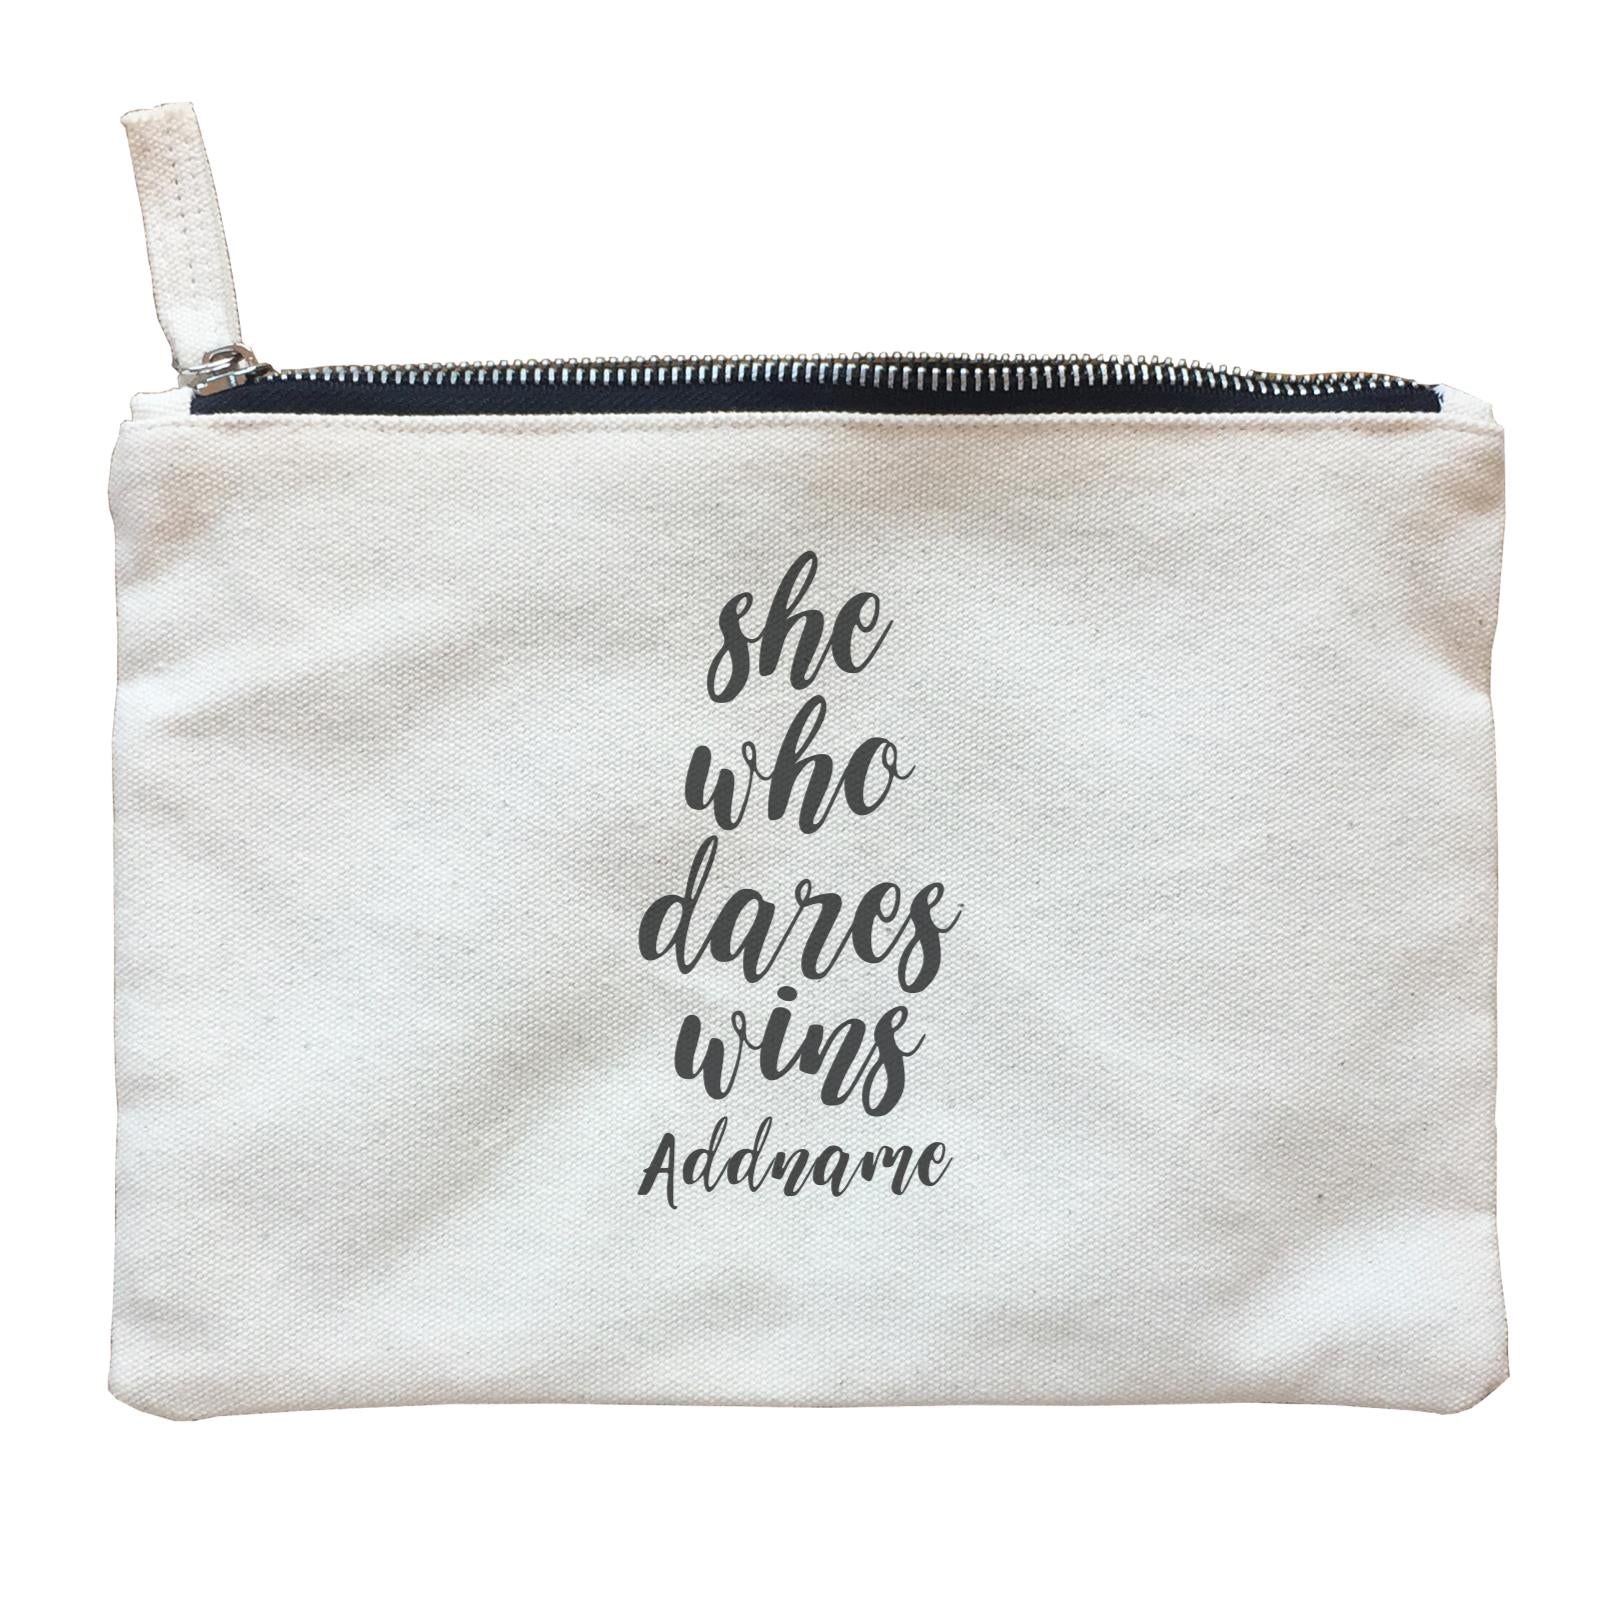 Girl Boss Quotes She Who Dares Wins Addname Zipper Pouch